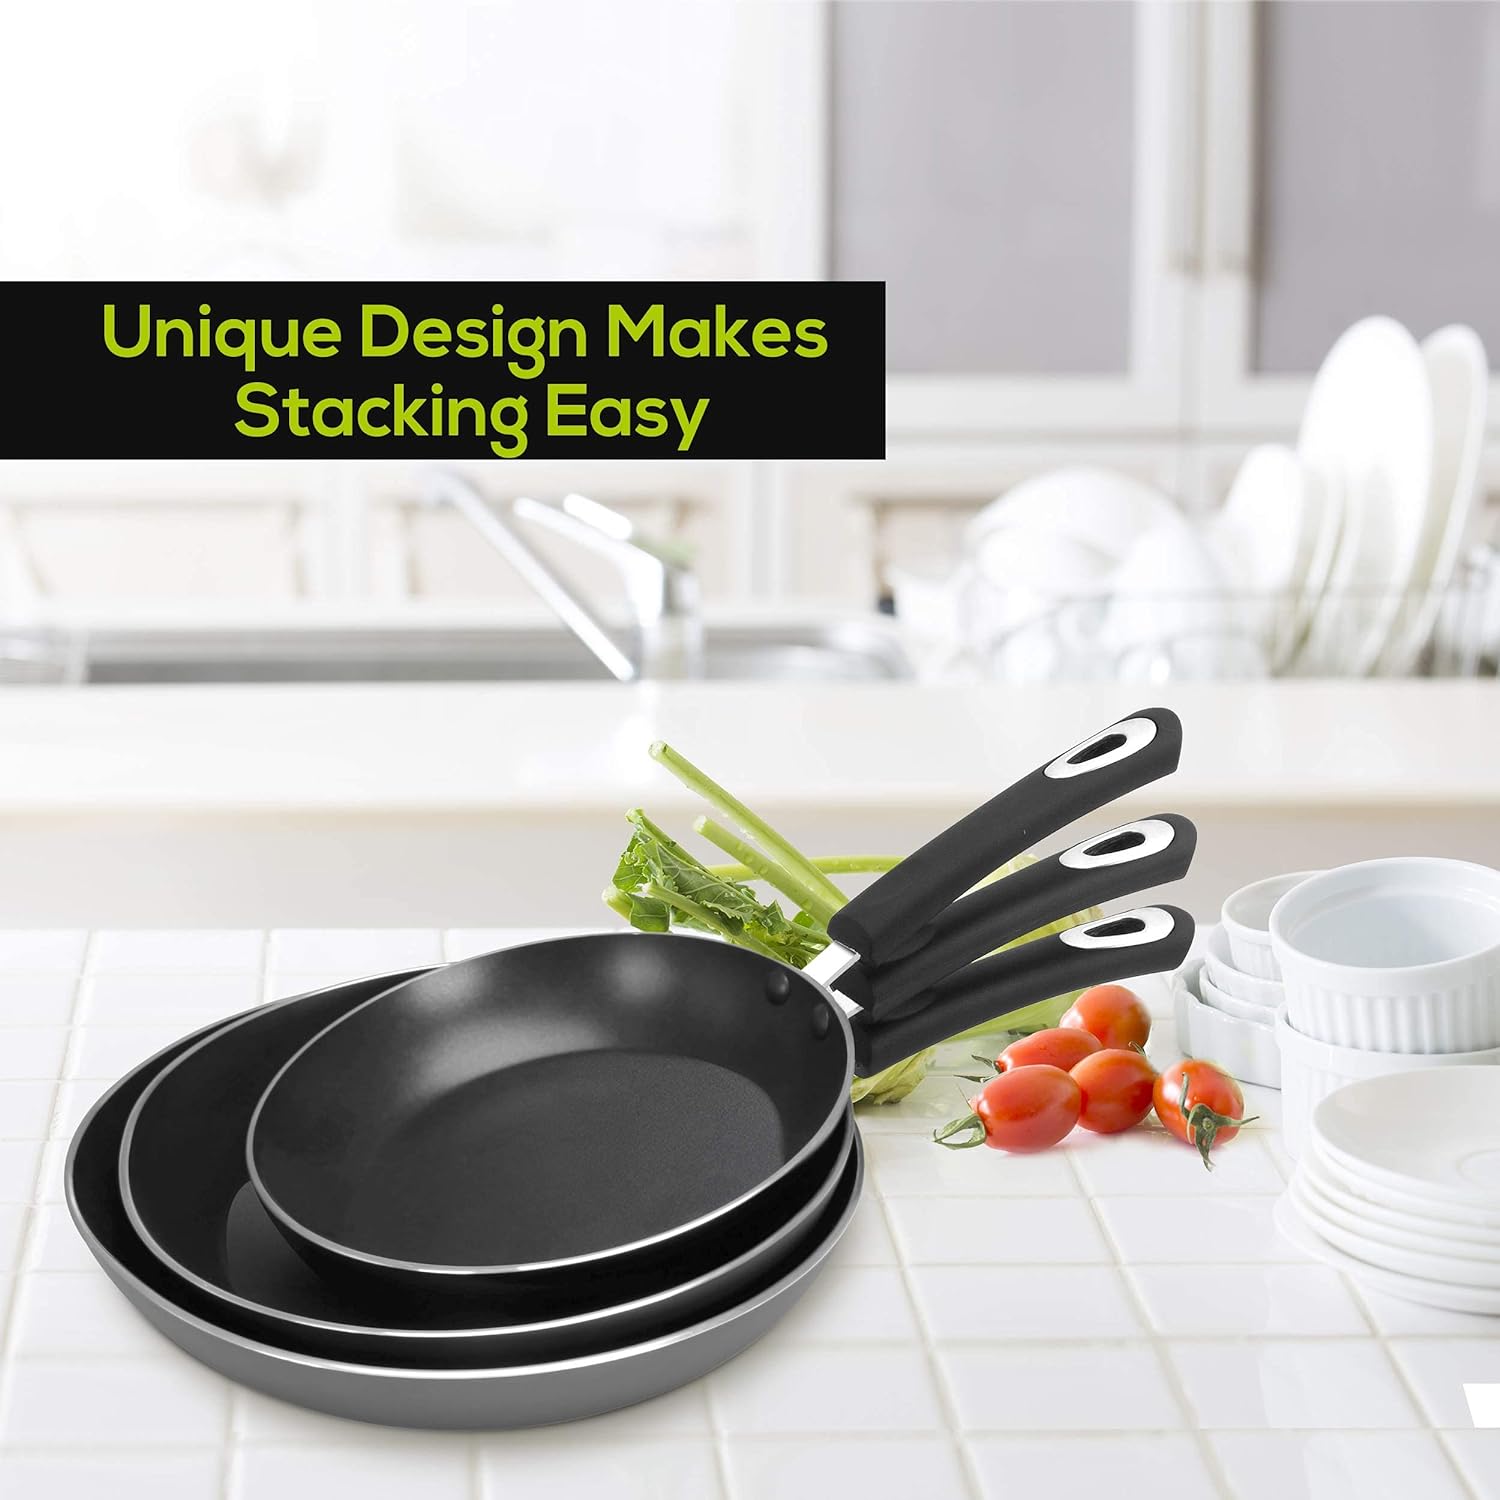 Utopia Kitchen Nonstick Frying Pan Set - 3 Piece Induction Bottom - 8 Inches, 9.5 Inches and 11 Inches (Grey-Black)